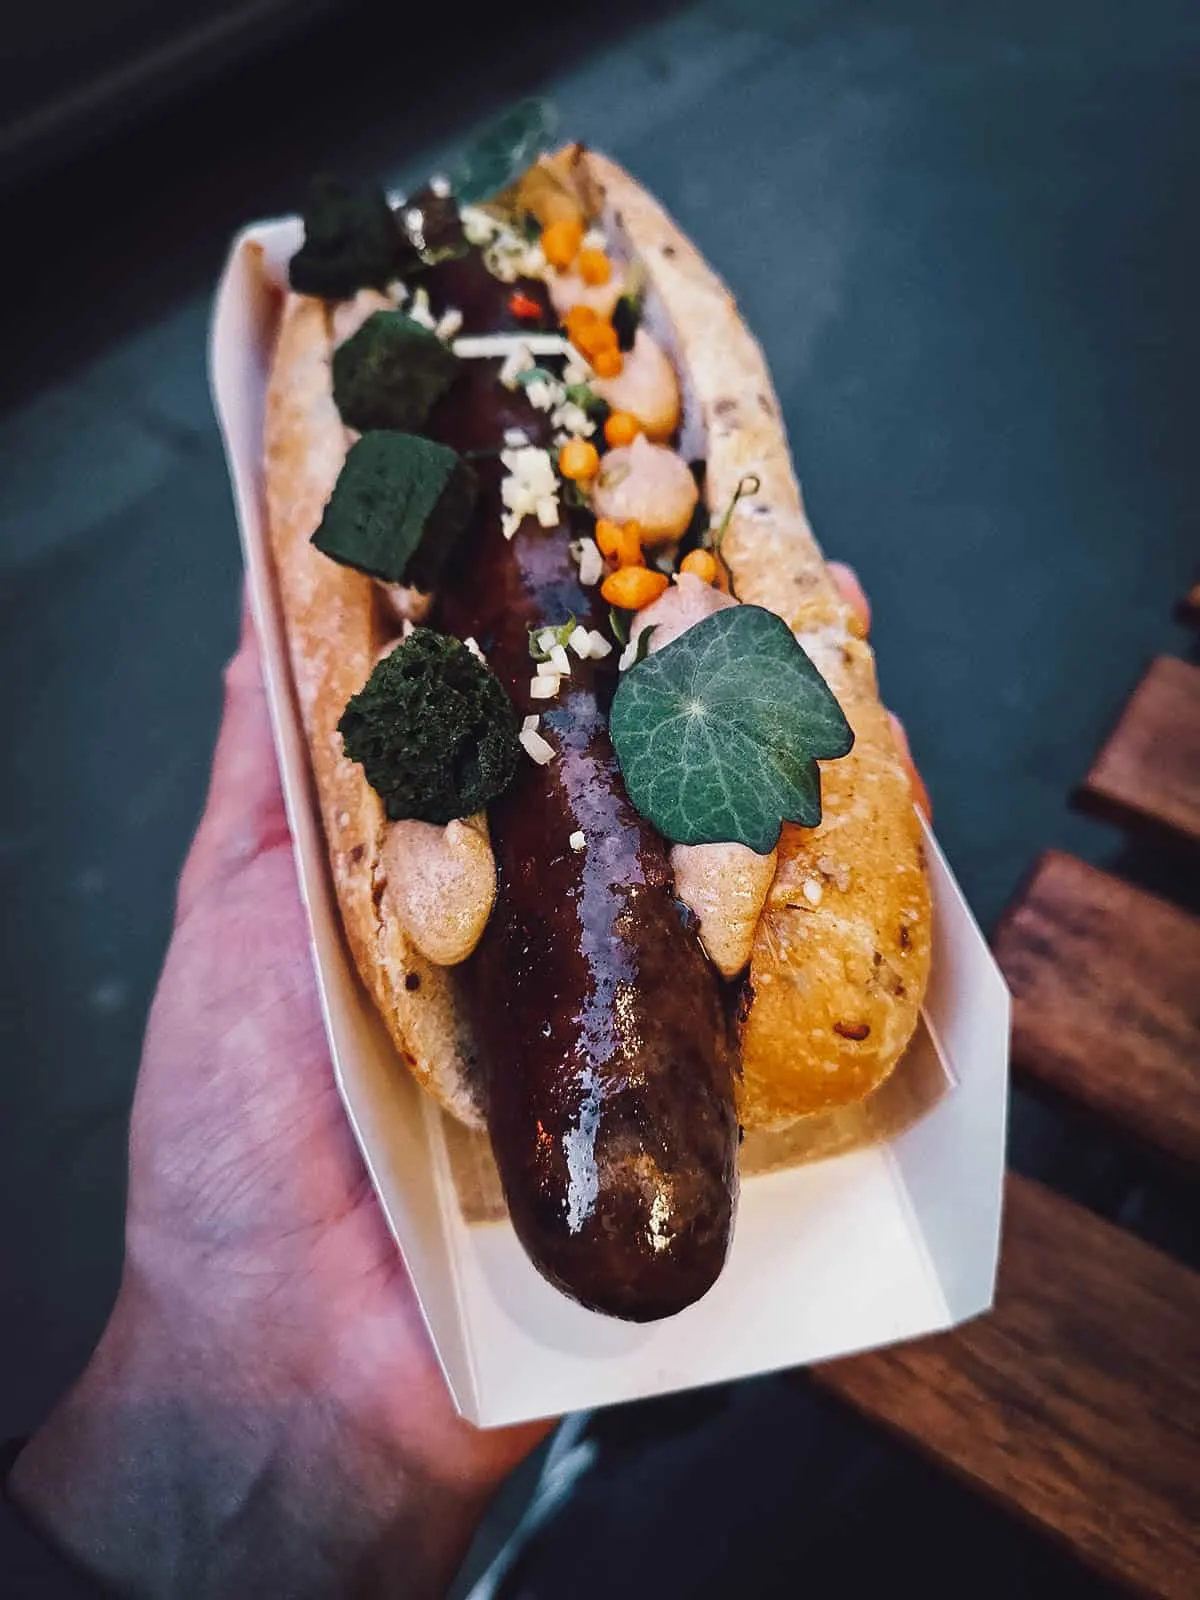 Gourmet hot dog from ToLTo, one of the best hot dog restaurants in Budapest